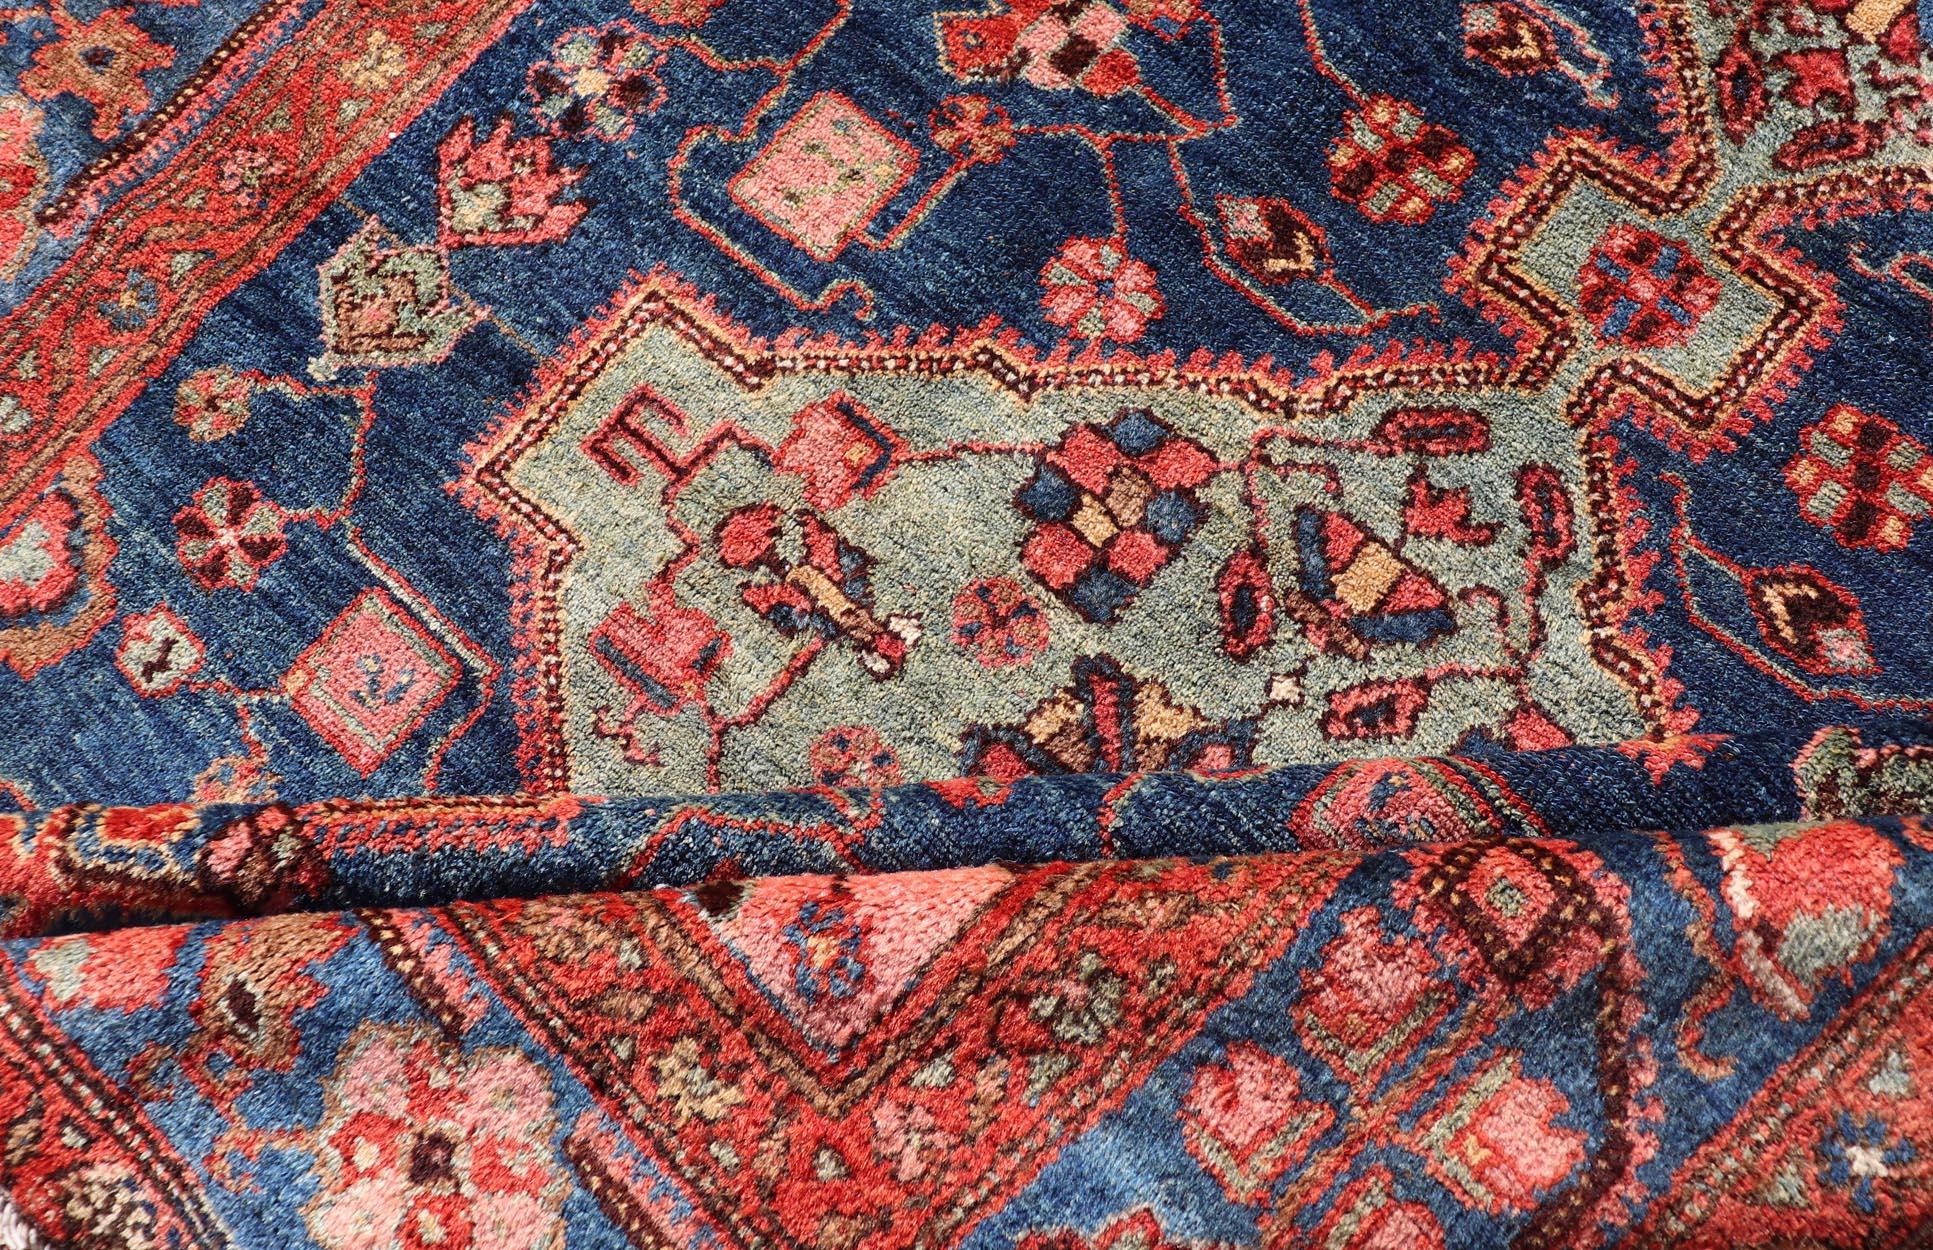 Antique Persian Karajeh Rug with Geometric Medallions in Green, Blue, and Red 6